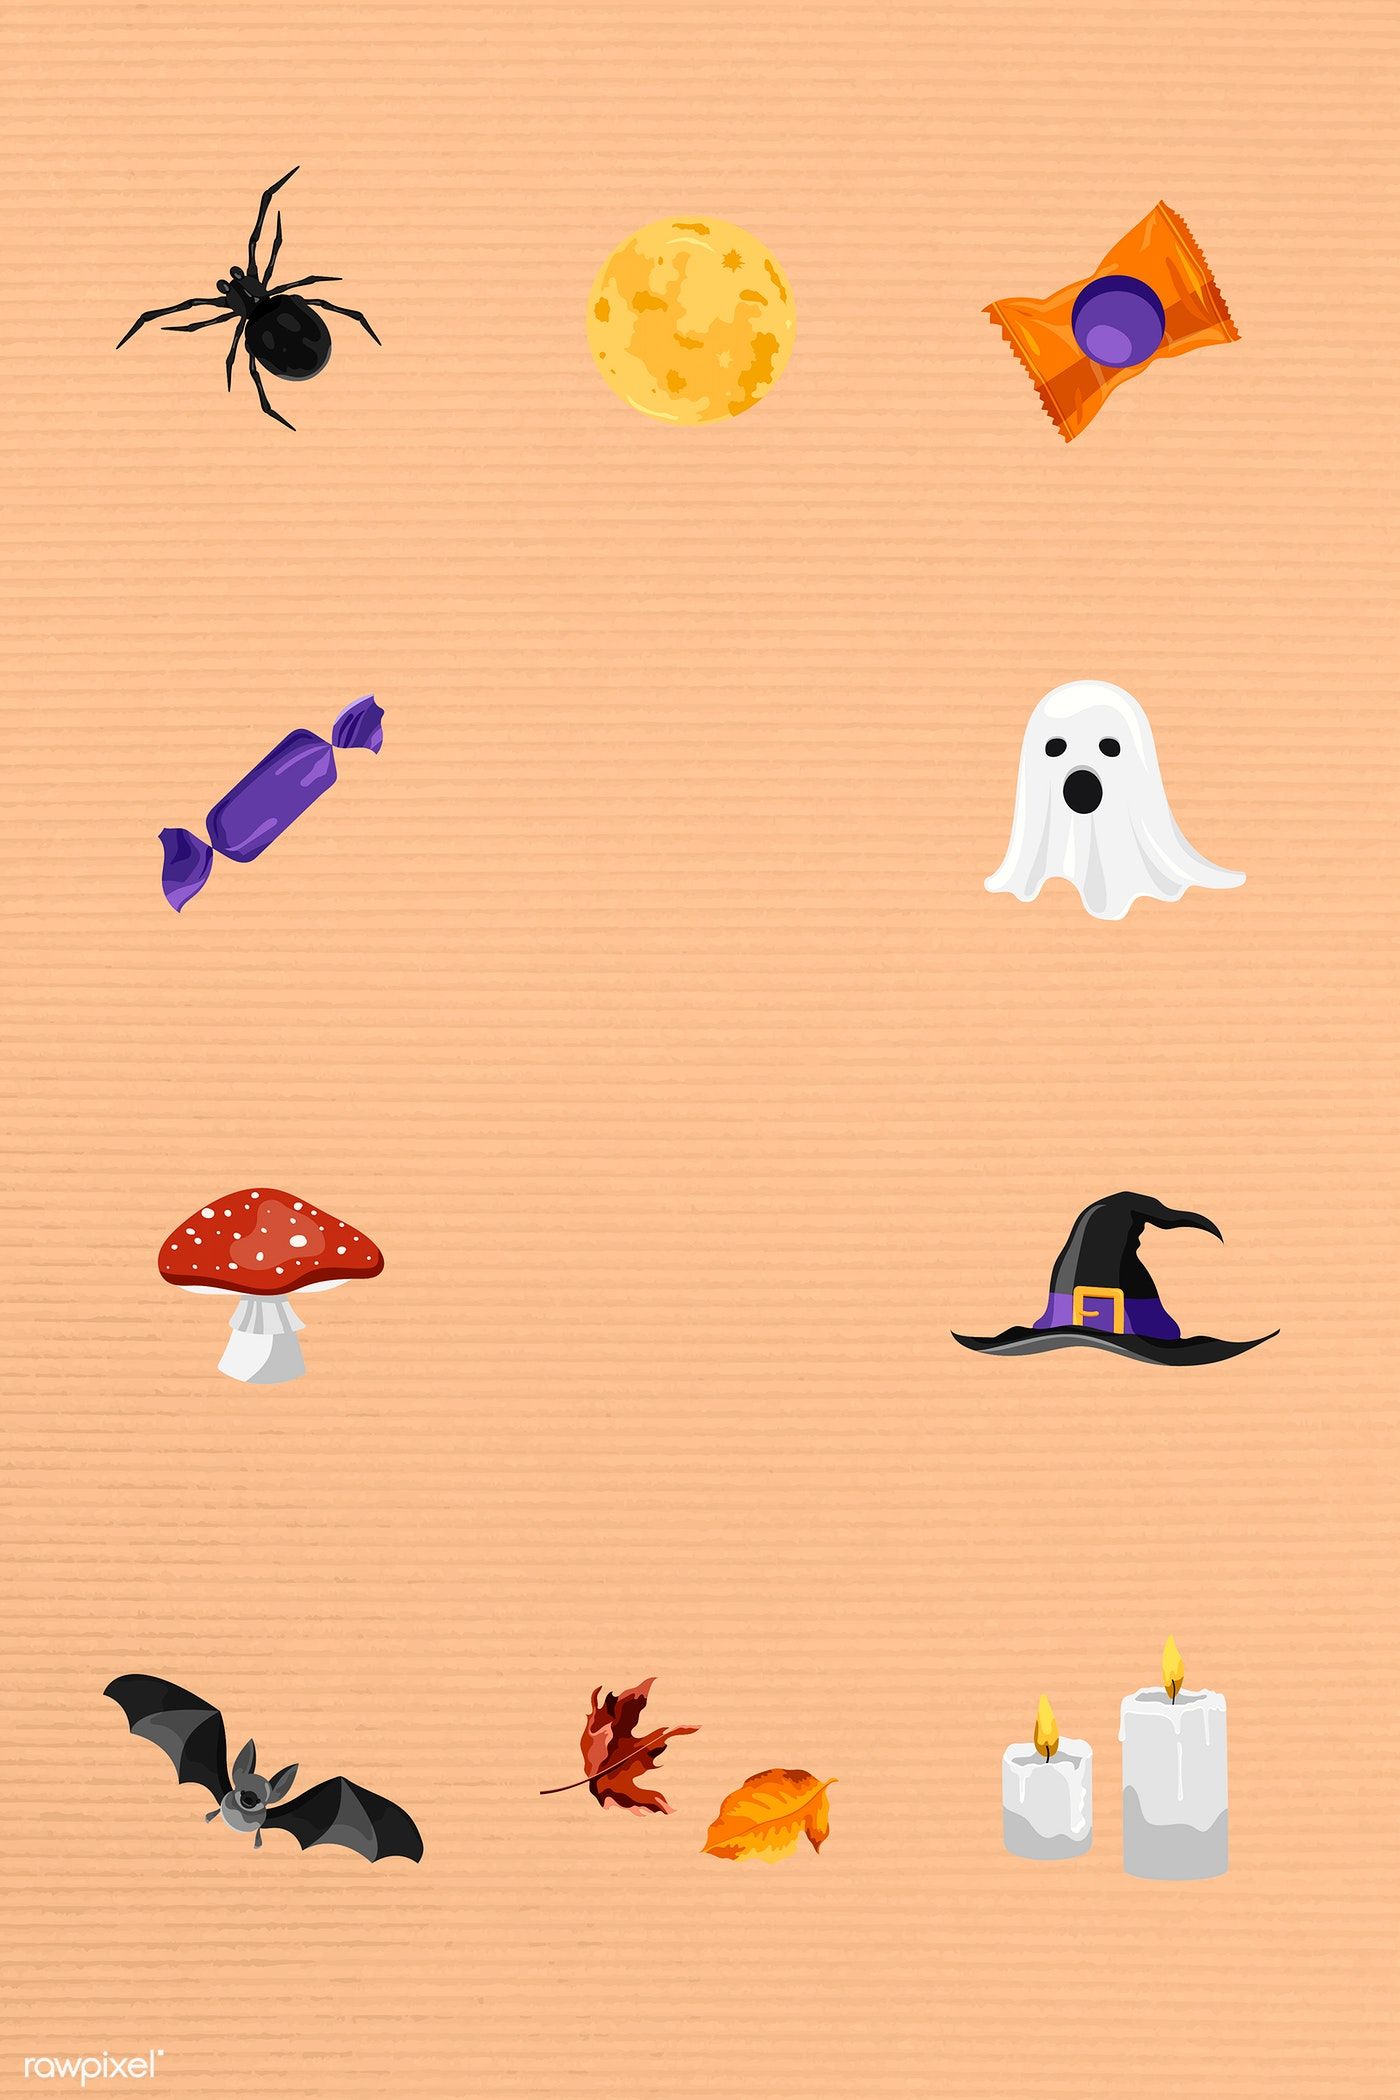 Halloween elements frame on pastel orange background vector. free image by rawpixel.com / Aew. Halloween patterns, Orange background, Vector free